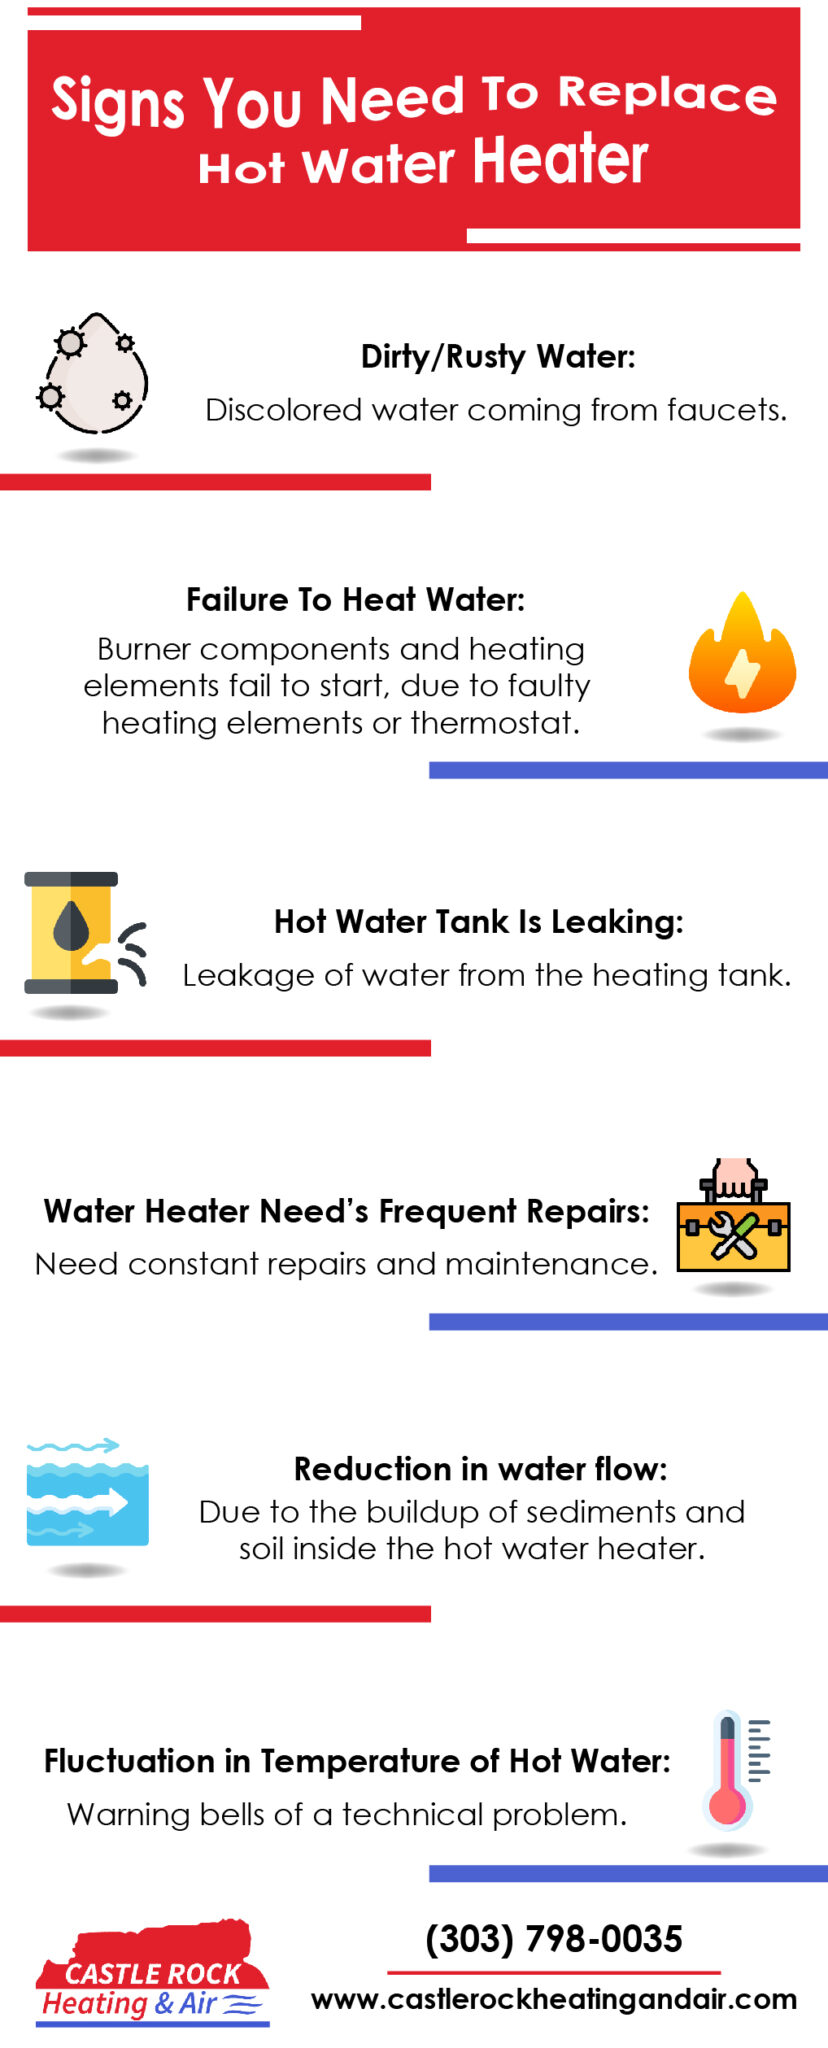 Signs You Need To Replace Hot Water Heater [Infographic]